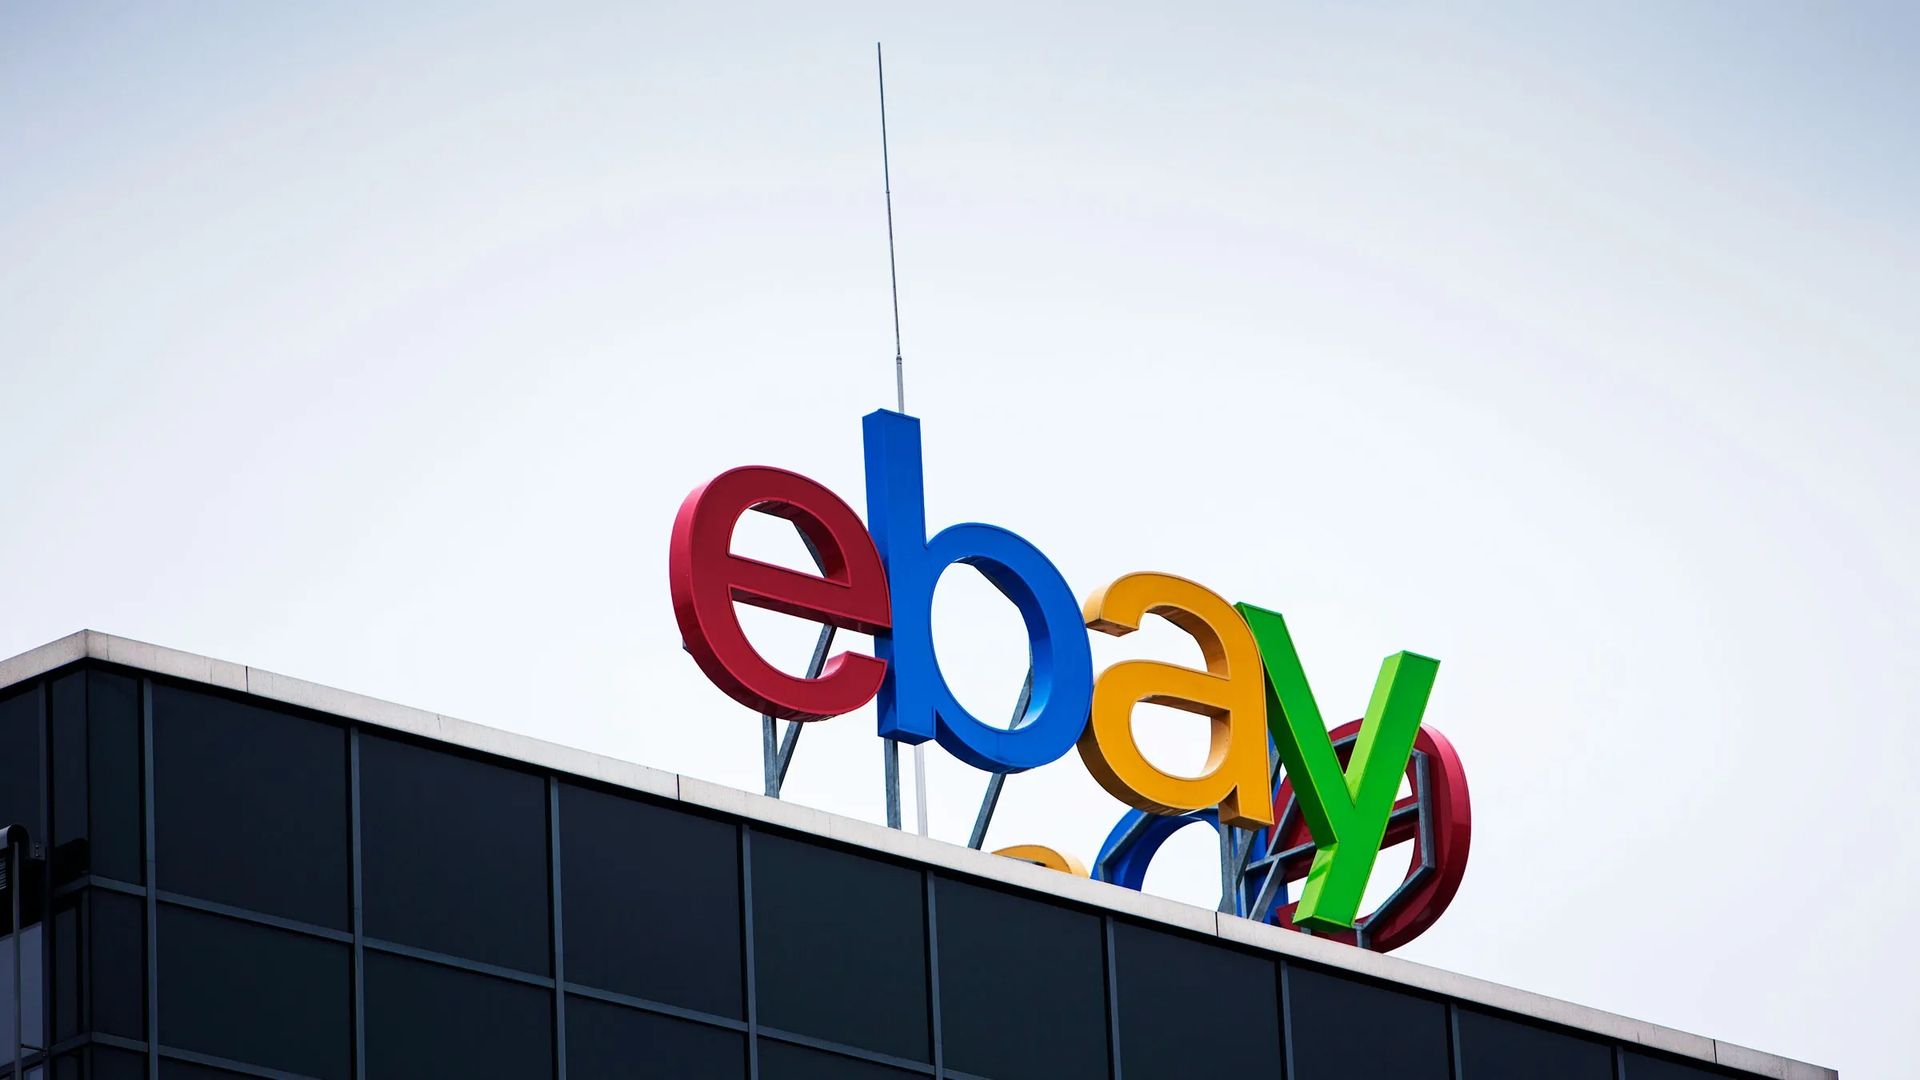 eBay has made its most significant move yet by buying the NFT marketplace KnownOrigin